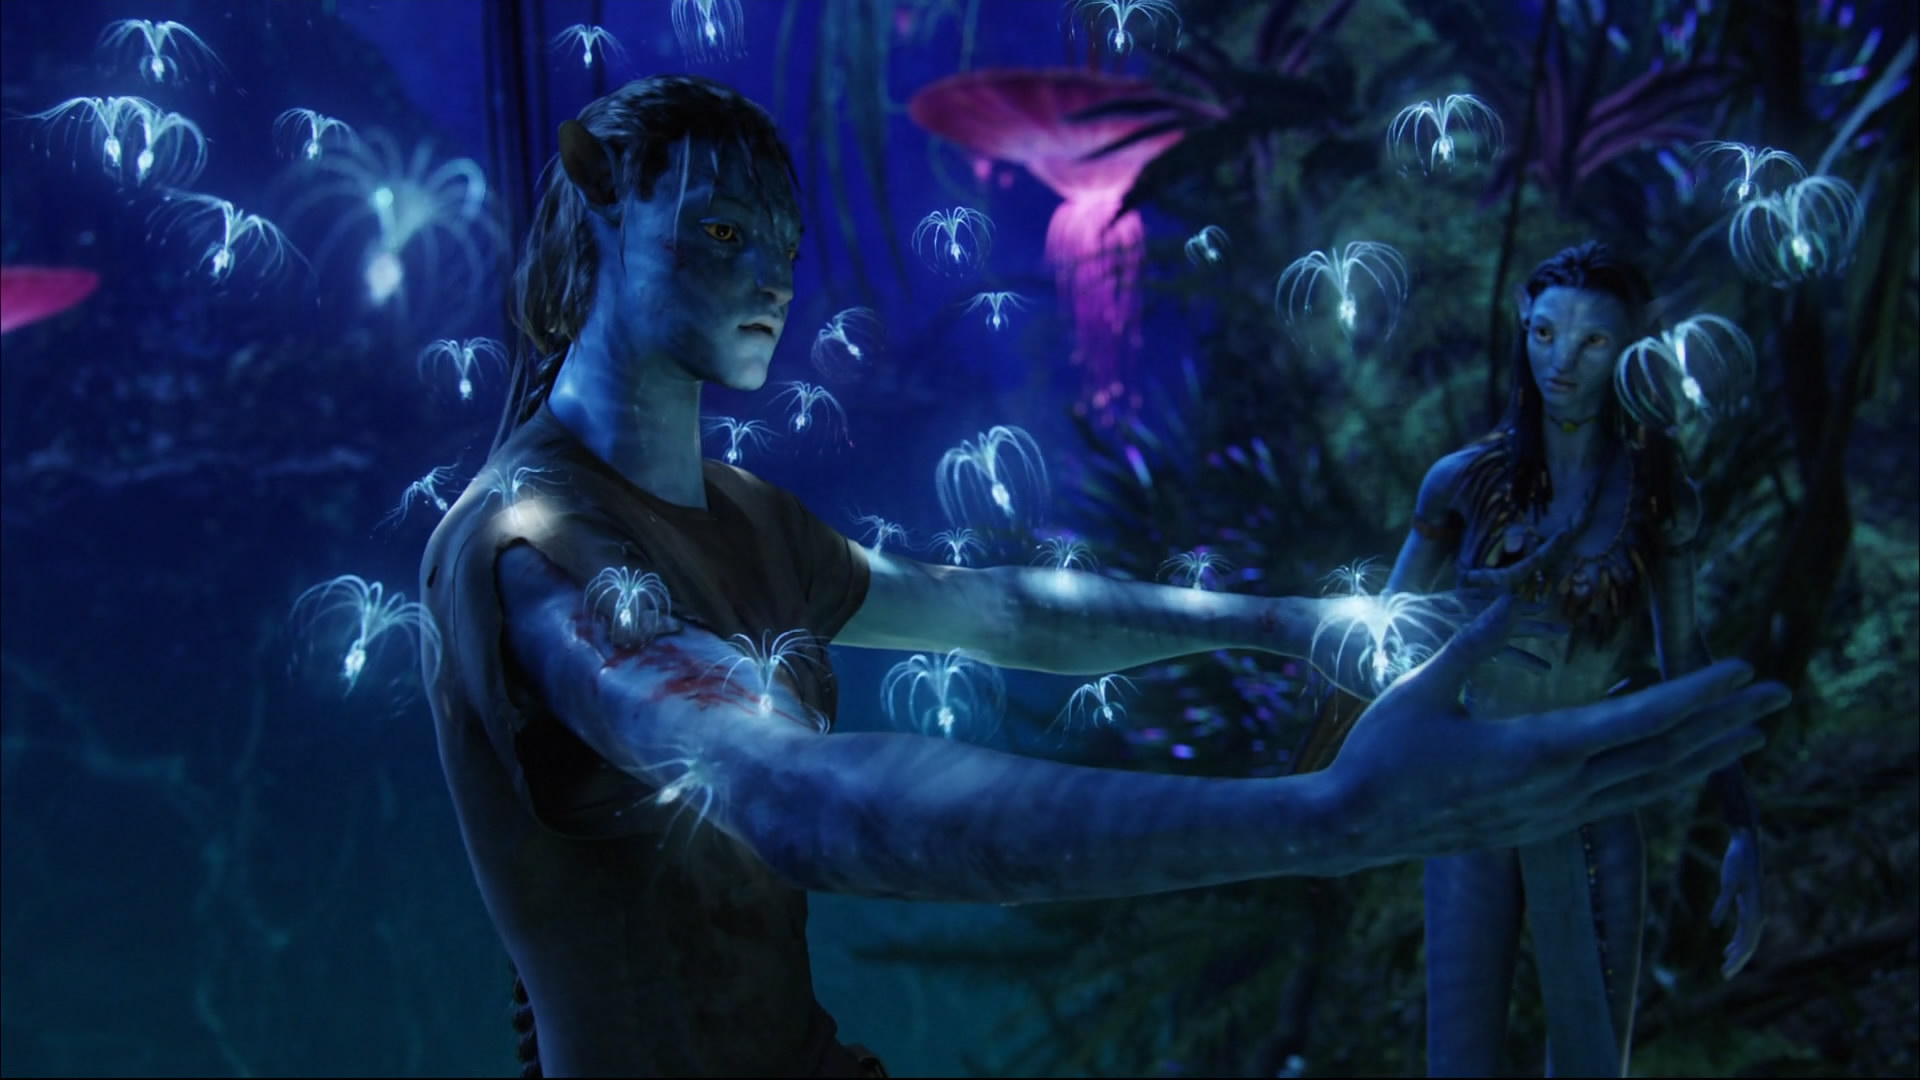 Na'vi couple in vivid HD wallpaper with Jake Sully and Neytiri from Avatar, featuring their unique yellow eyes.